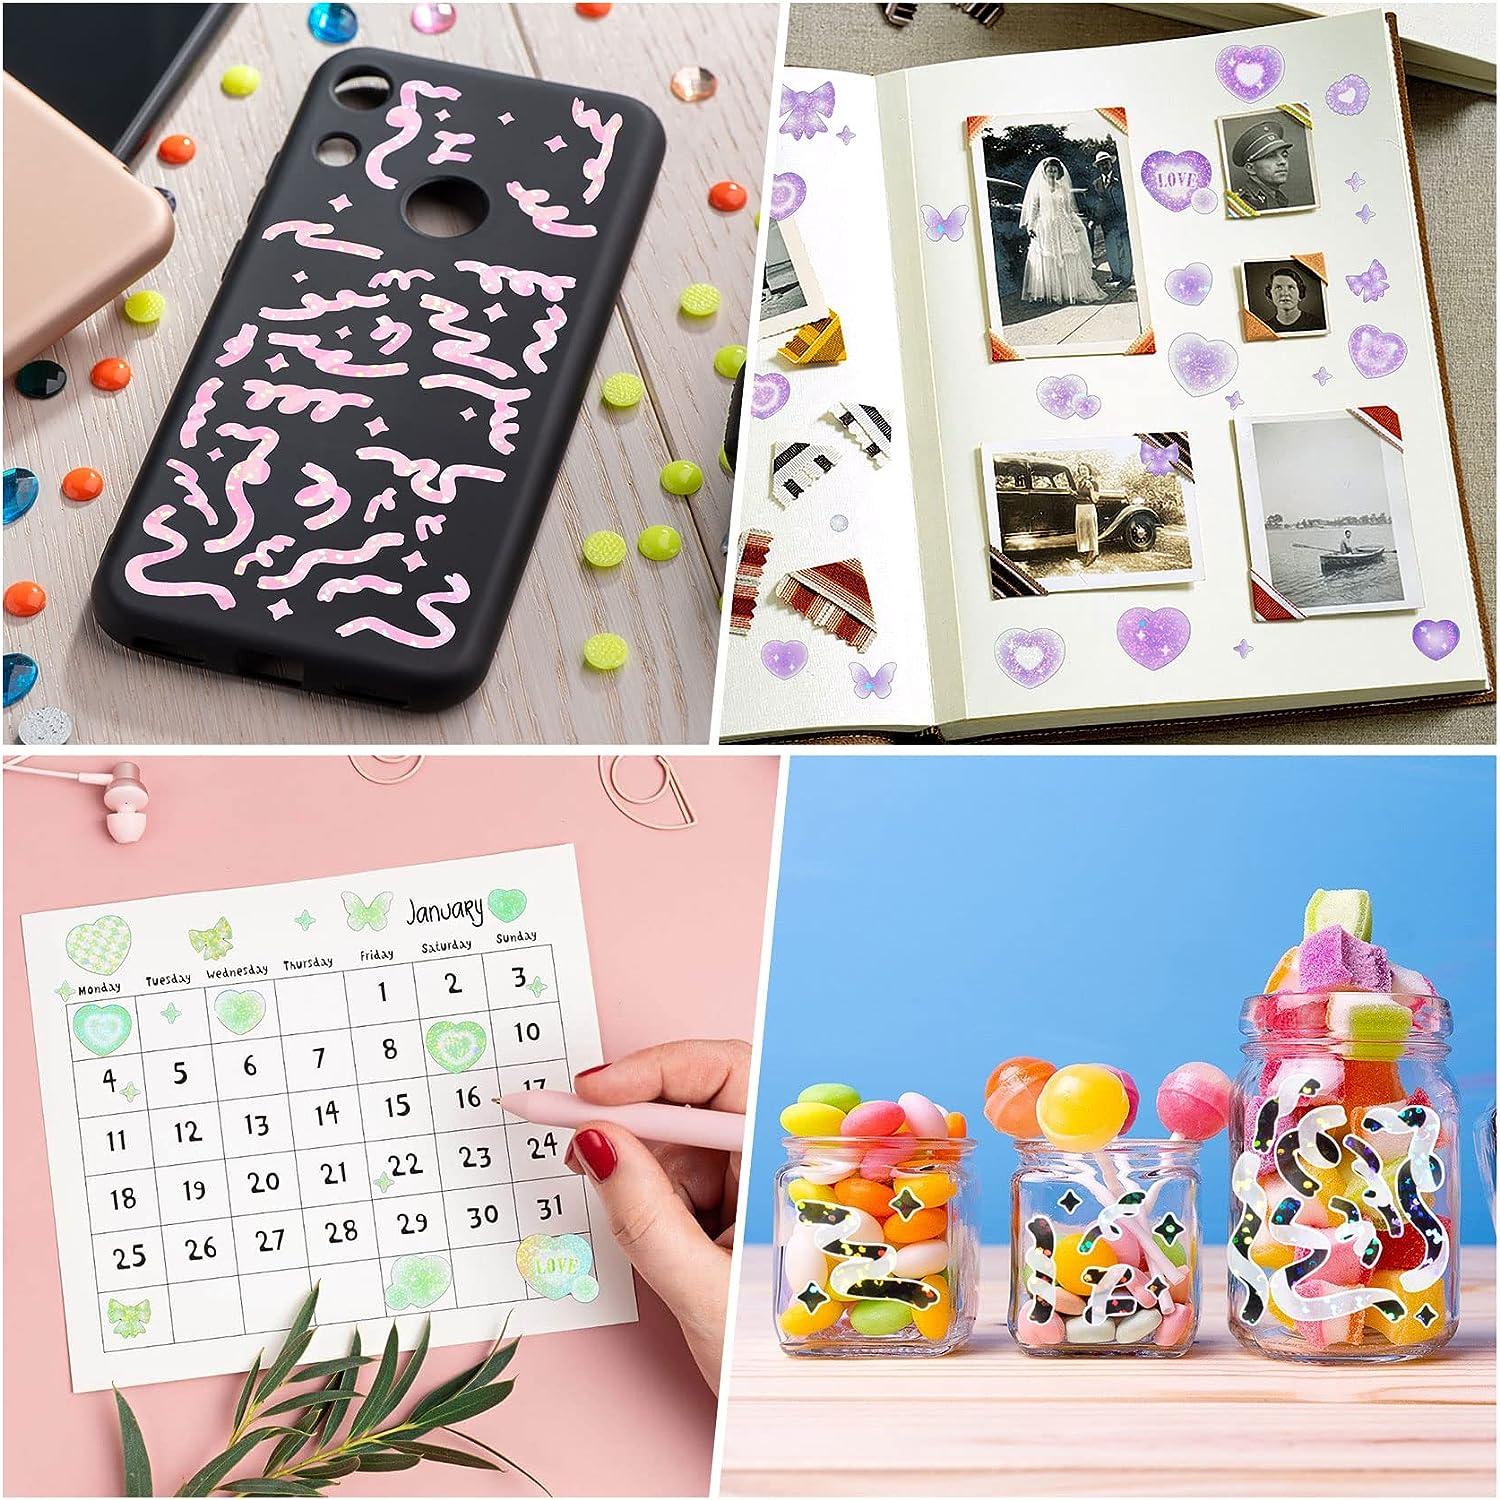 Korean Deco Stickers Set, DIY Colorful Glitter Self Adhesive Stickers with  Cute Animal Pattern, Kpop Potocard Korean Stickers, Cute Deco Stickers for